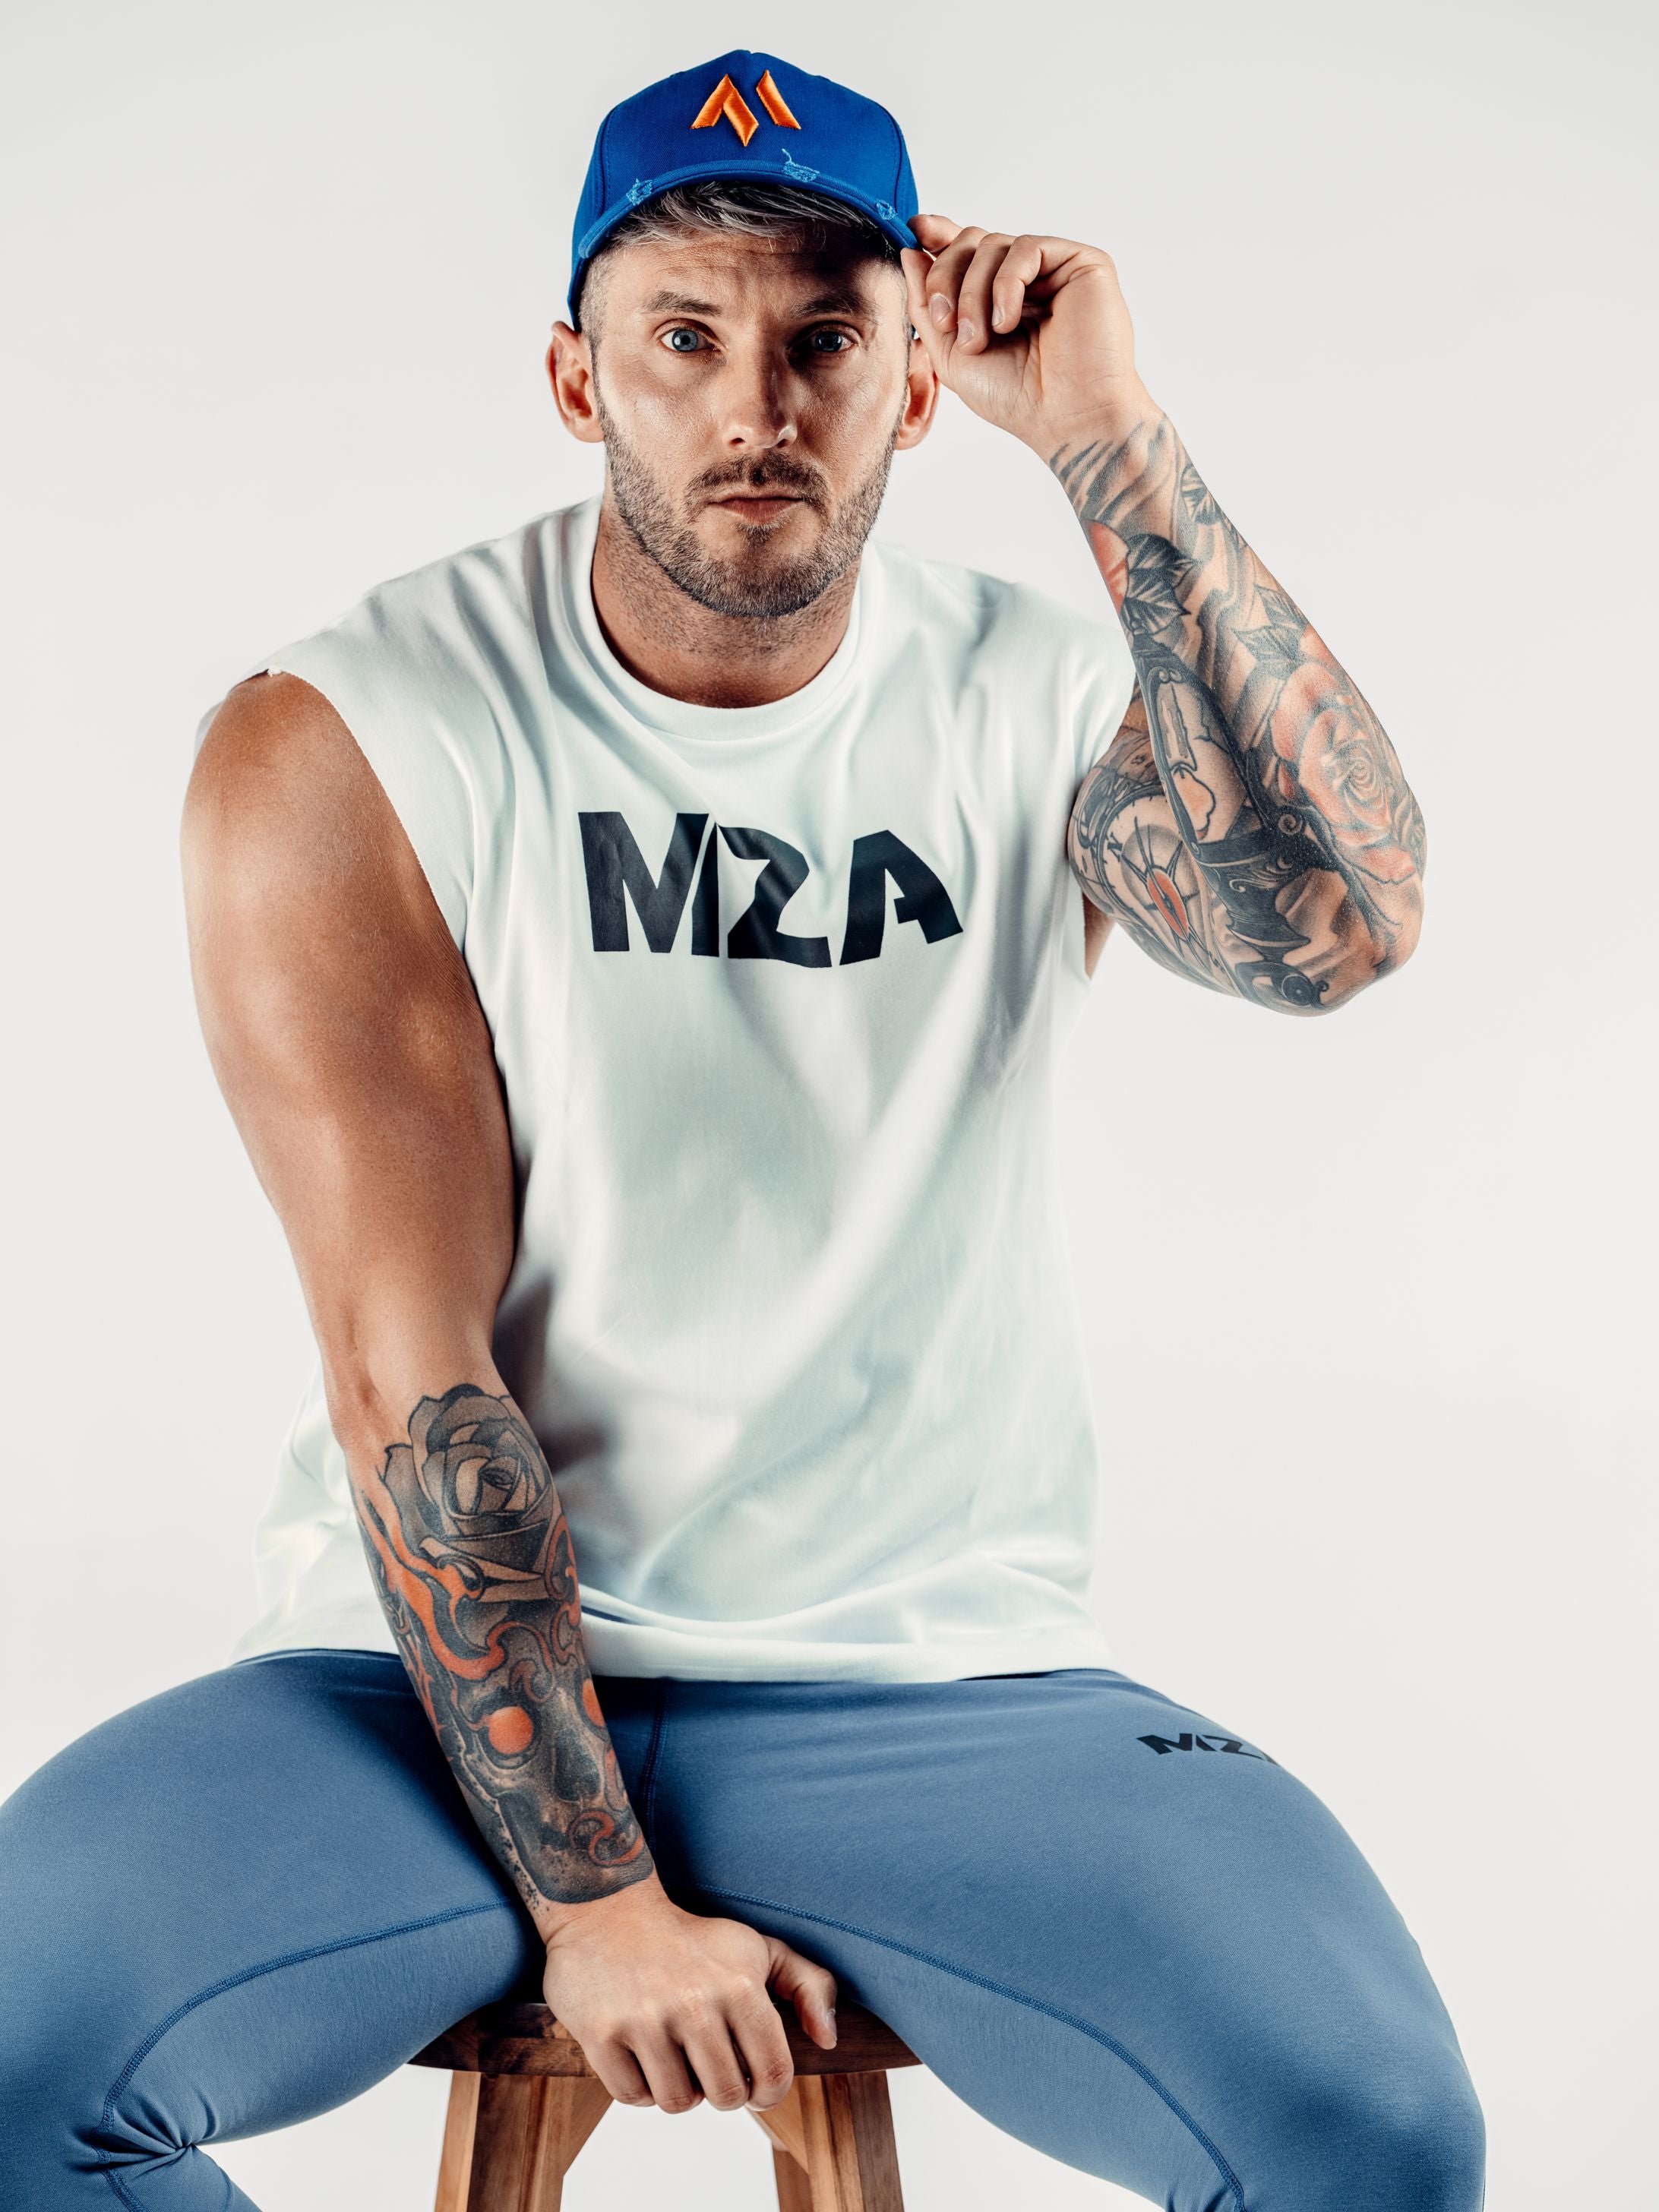 This is Shane wearing the new standard 3d distressed 5 panel in electric blue. It features the M emblem in orange. Shane is holding on to the peak with his right hand. Shane is also wearing the new standard vest in white which features the MZA logo on his chest and the new standard joggers in blue.